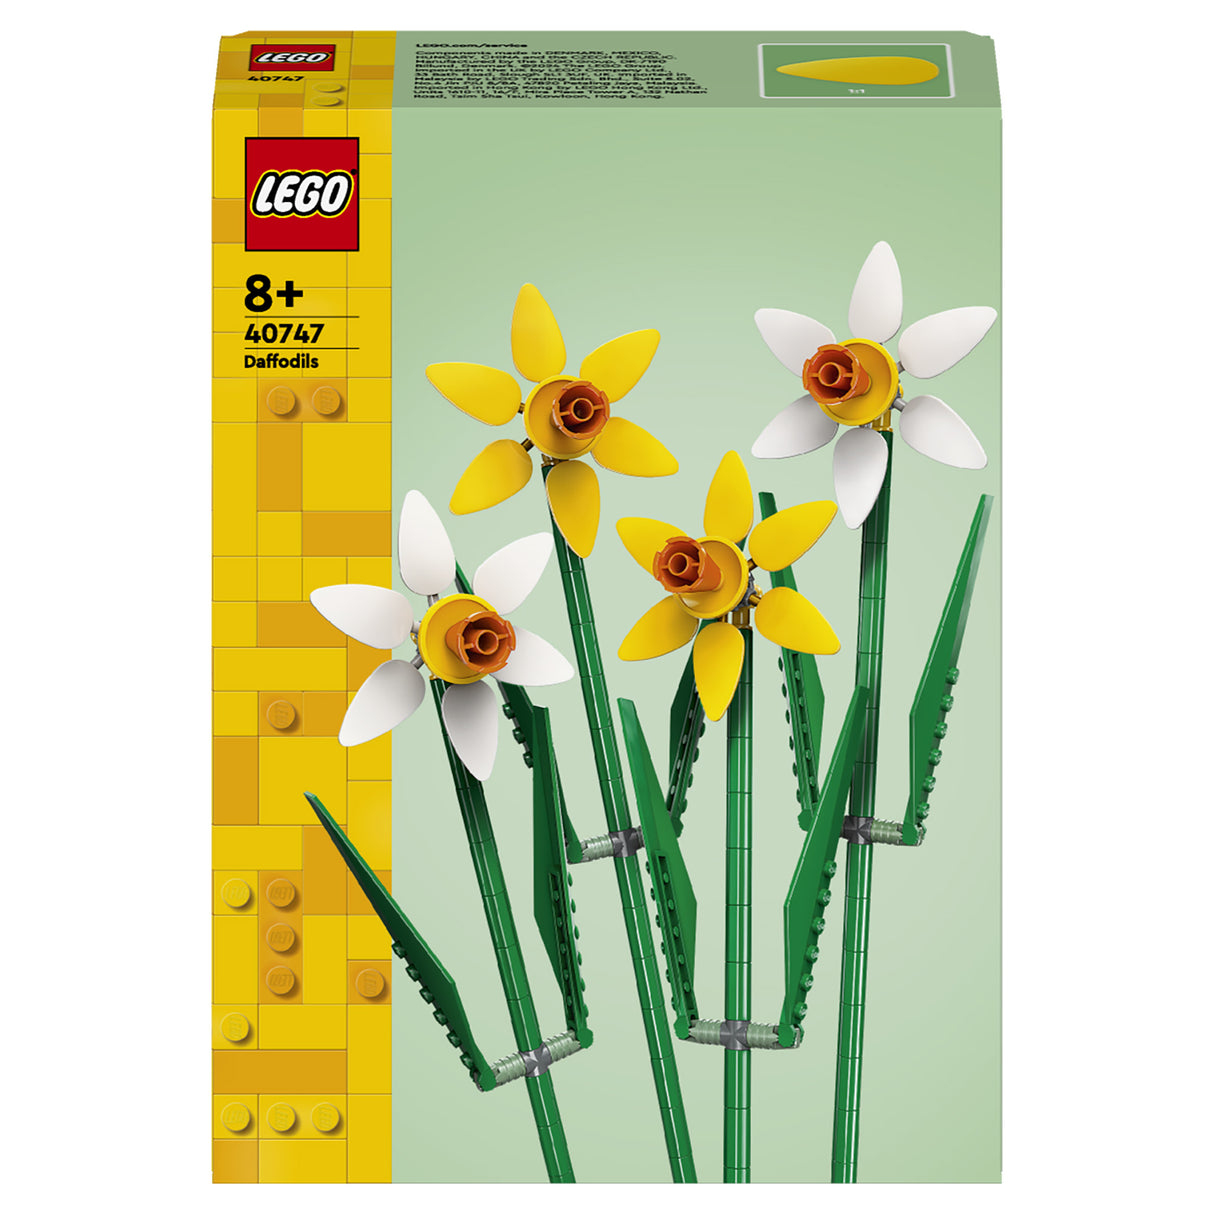 LEGO Bontanical Collection Daffodils 40747, (216-pieces)